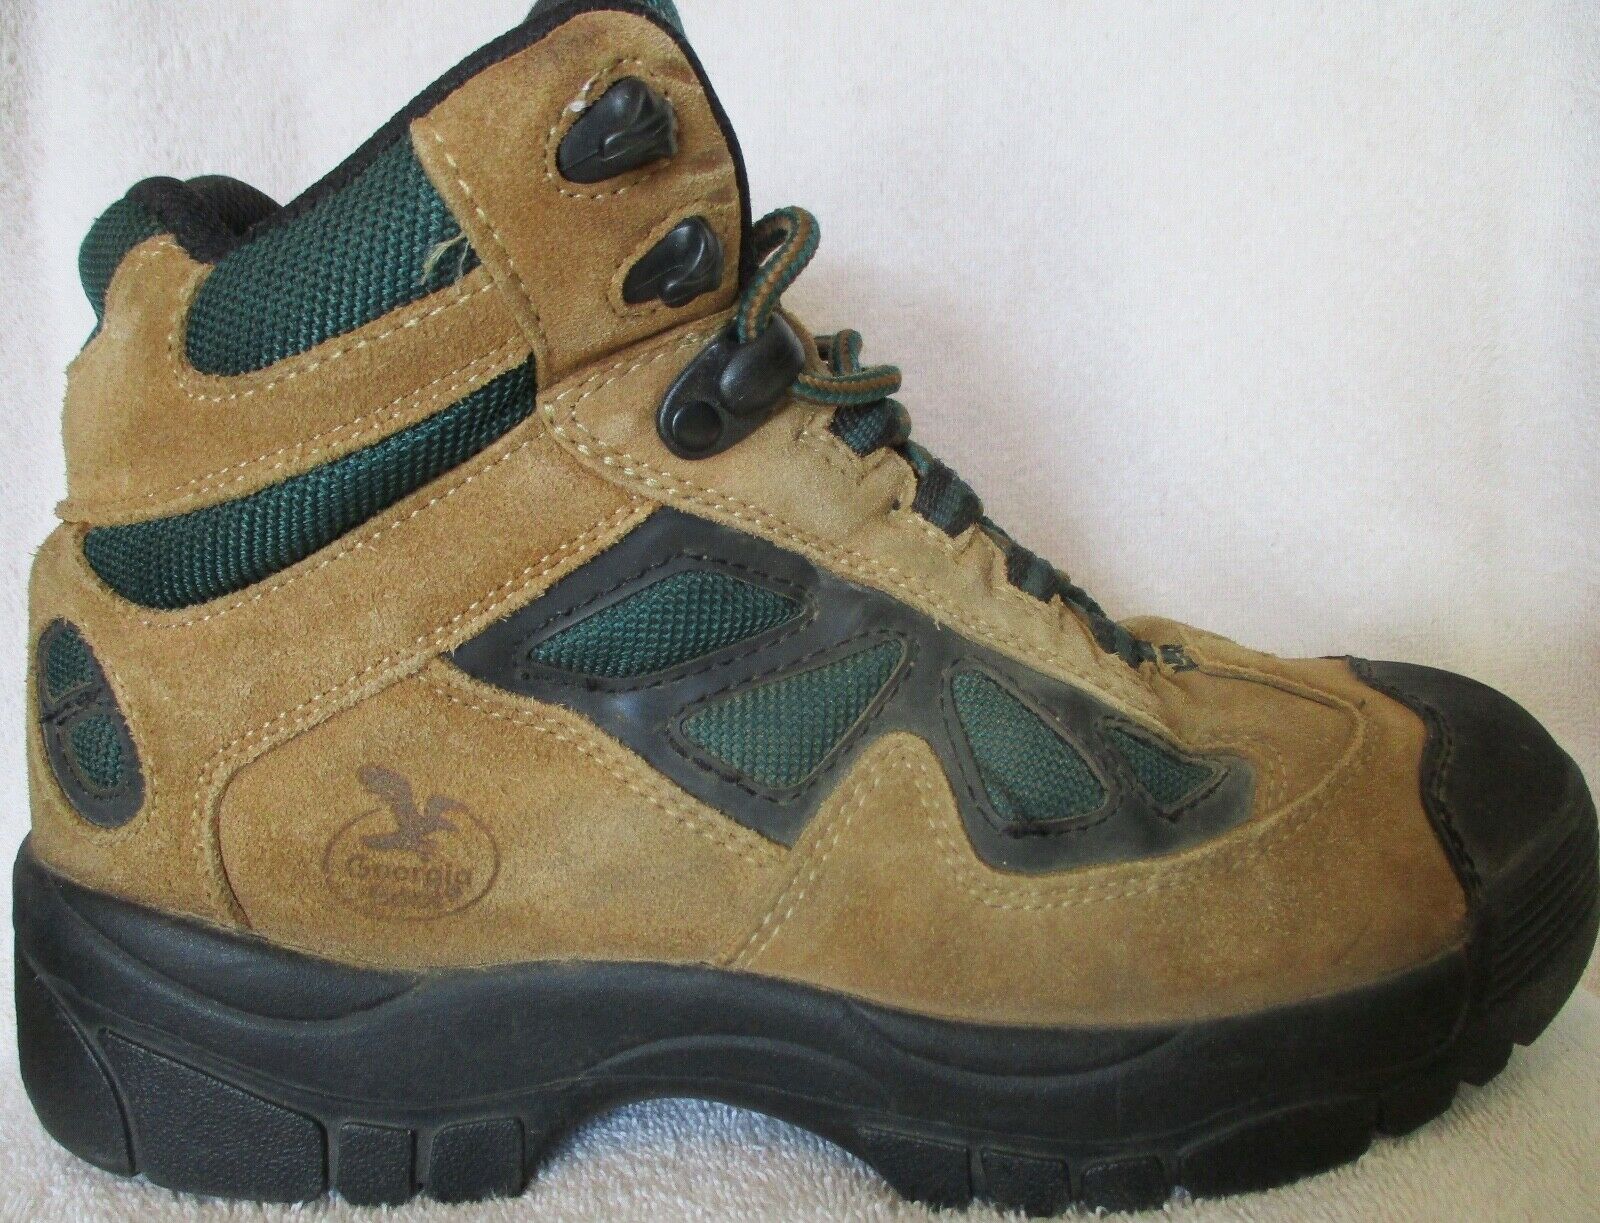 Vintage Georgia Boots - Hiking Boots Brown Suede Leather Green Accents Size 11-W